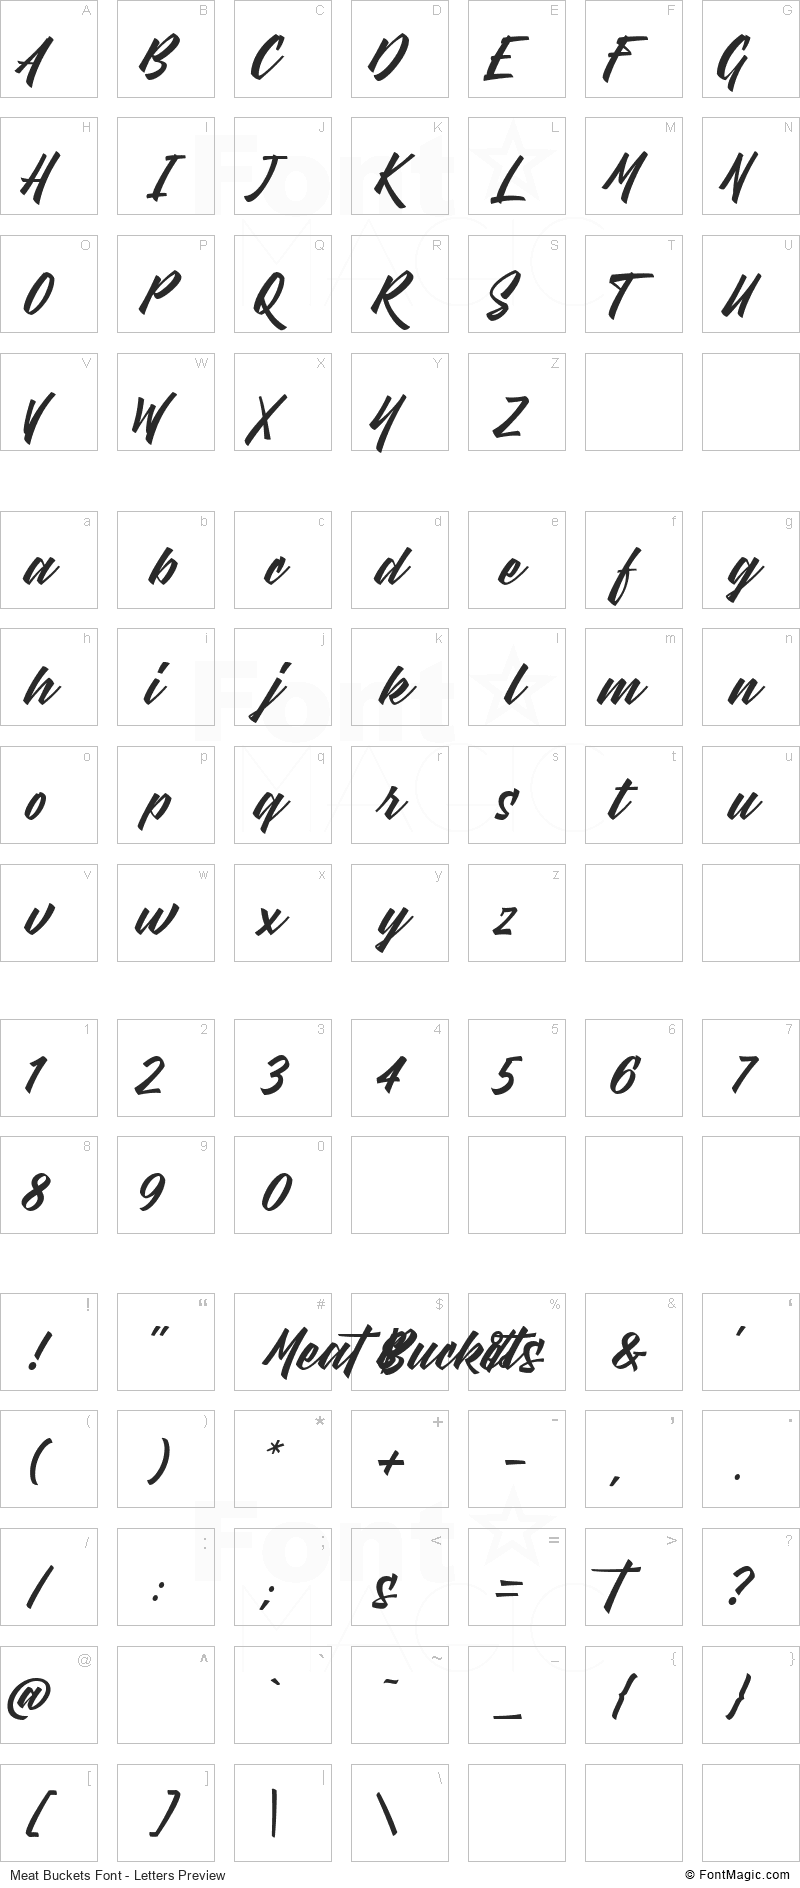 Meat Buckets Font - All Latters Preview Chart